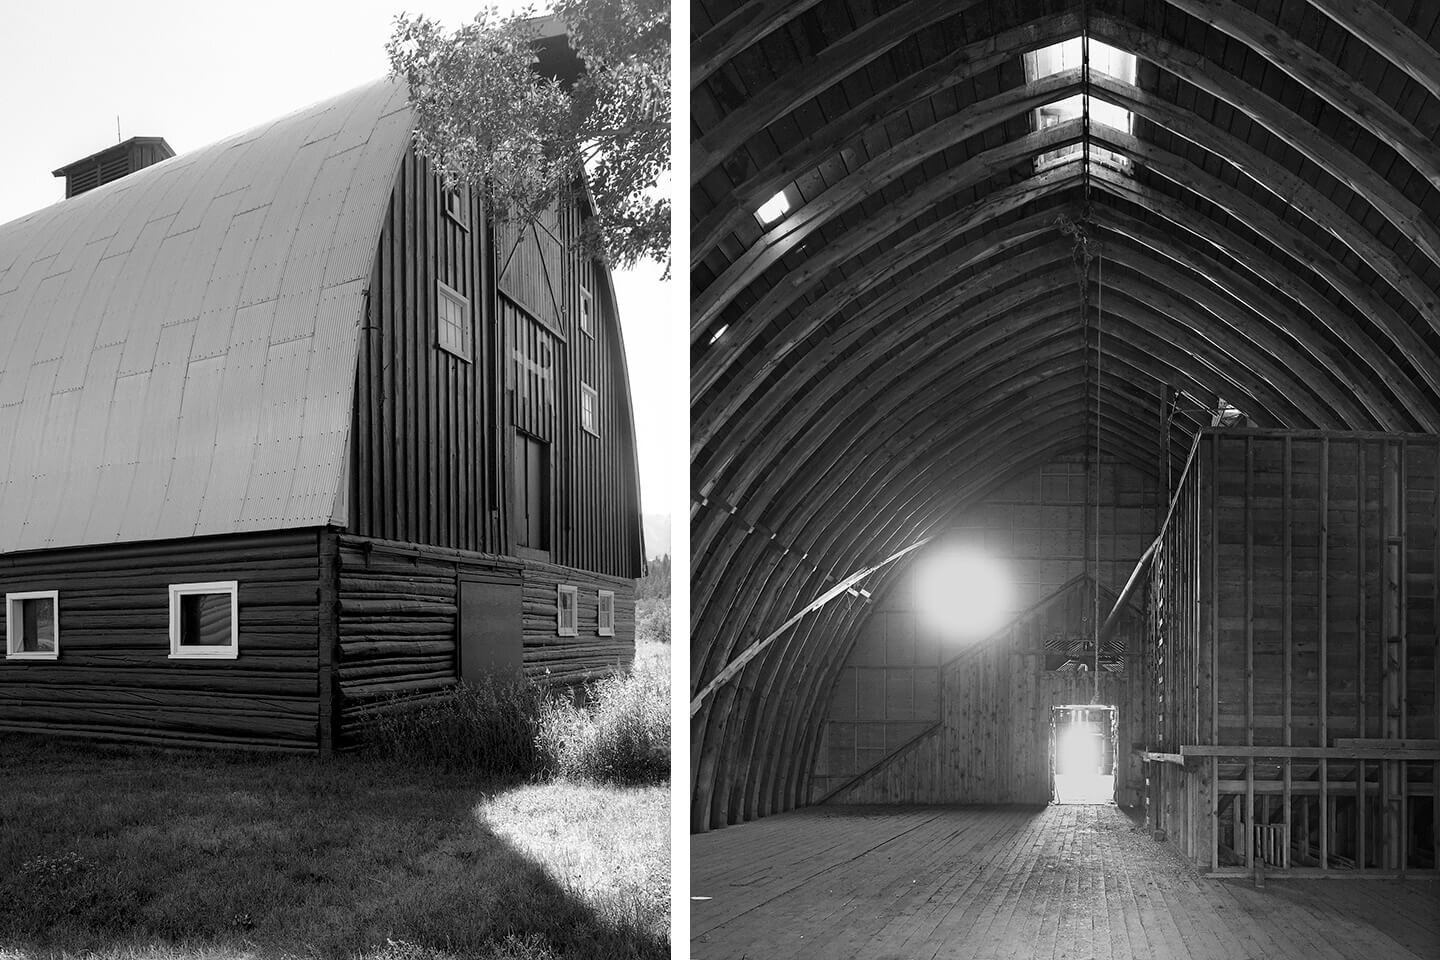 Gracefully arching gothic roof exterior and barn interior